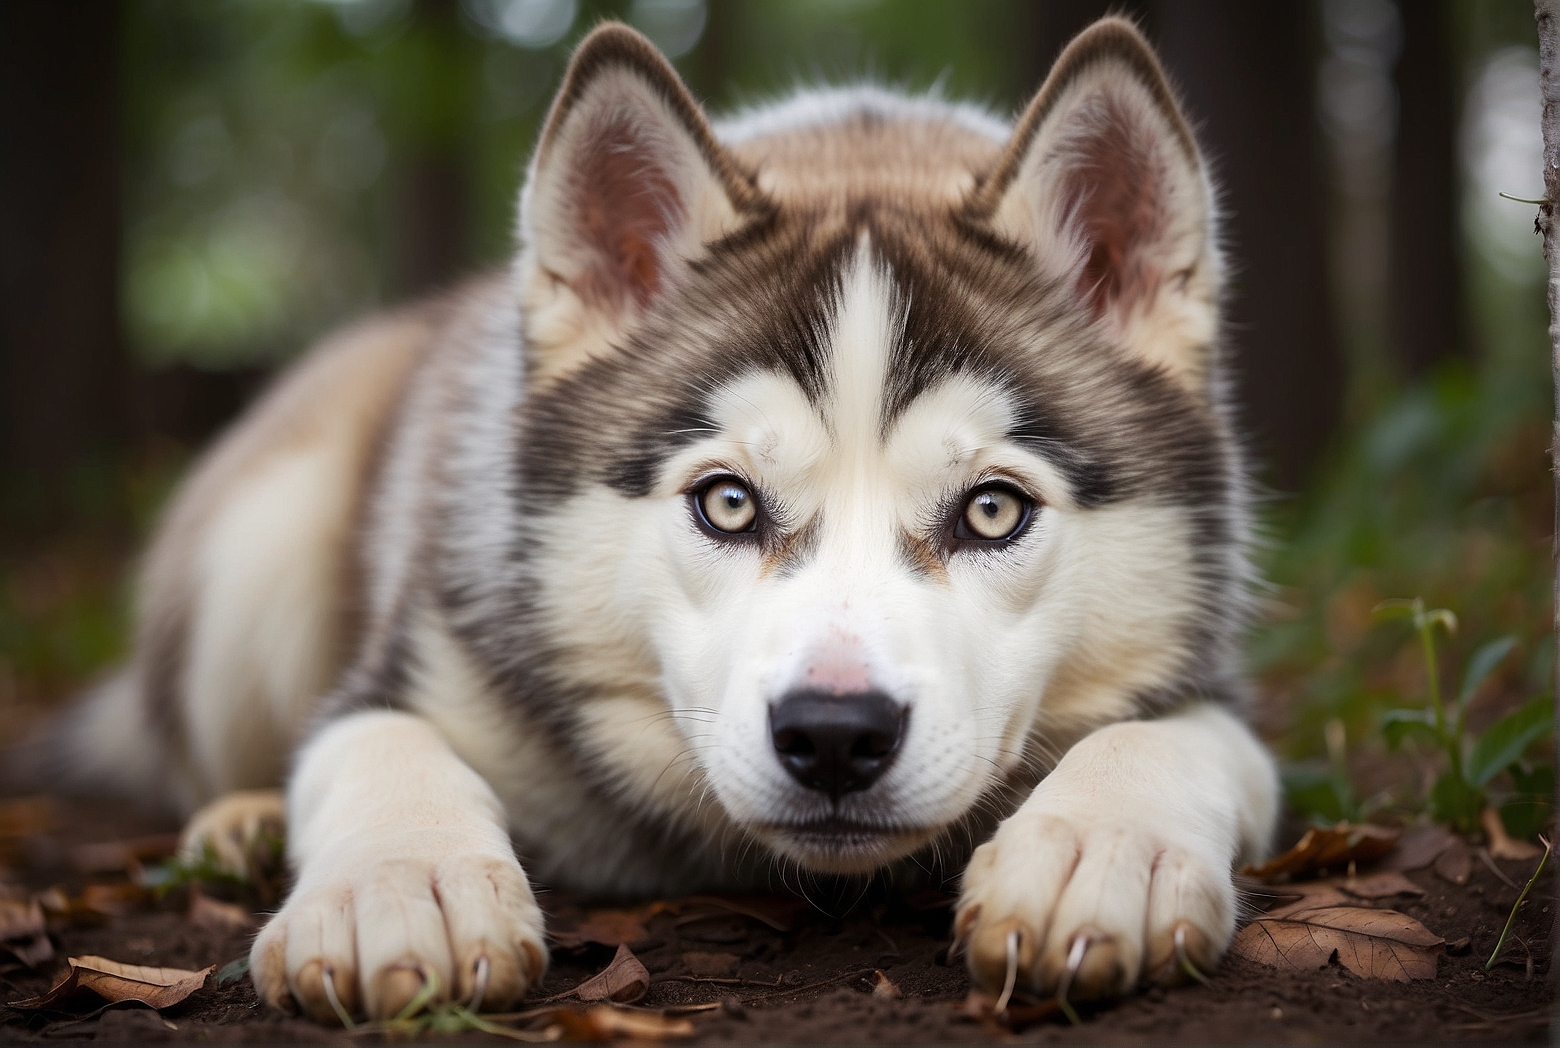 The Unique Eye Color of Siberian Huskies